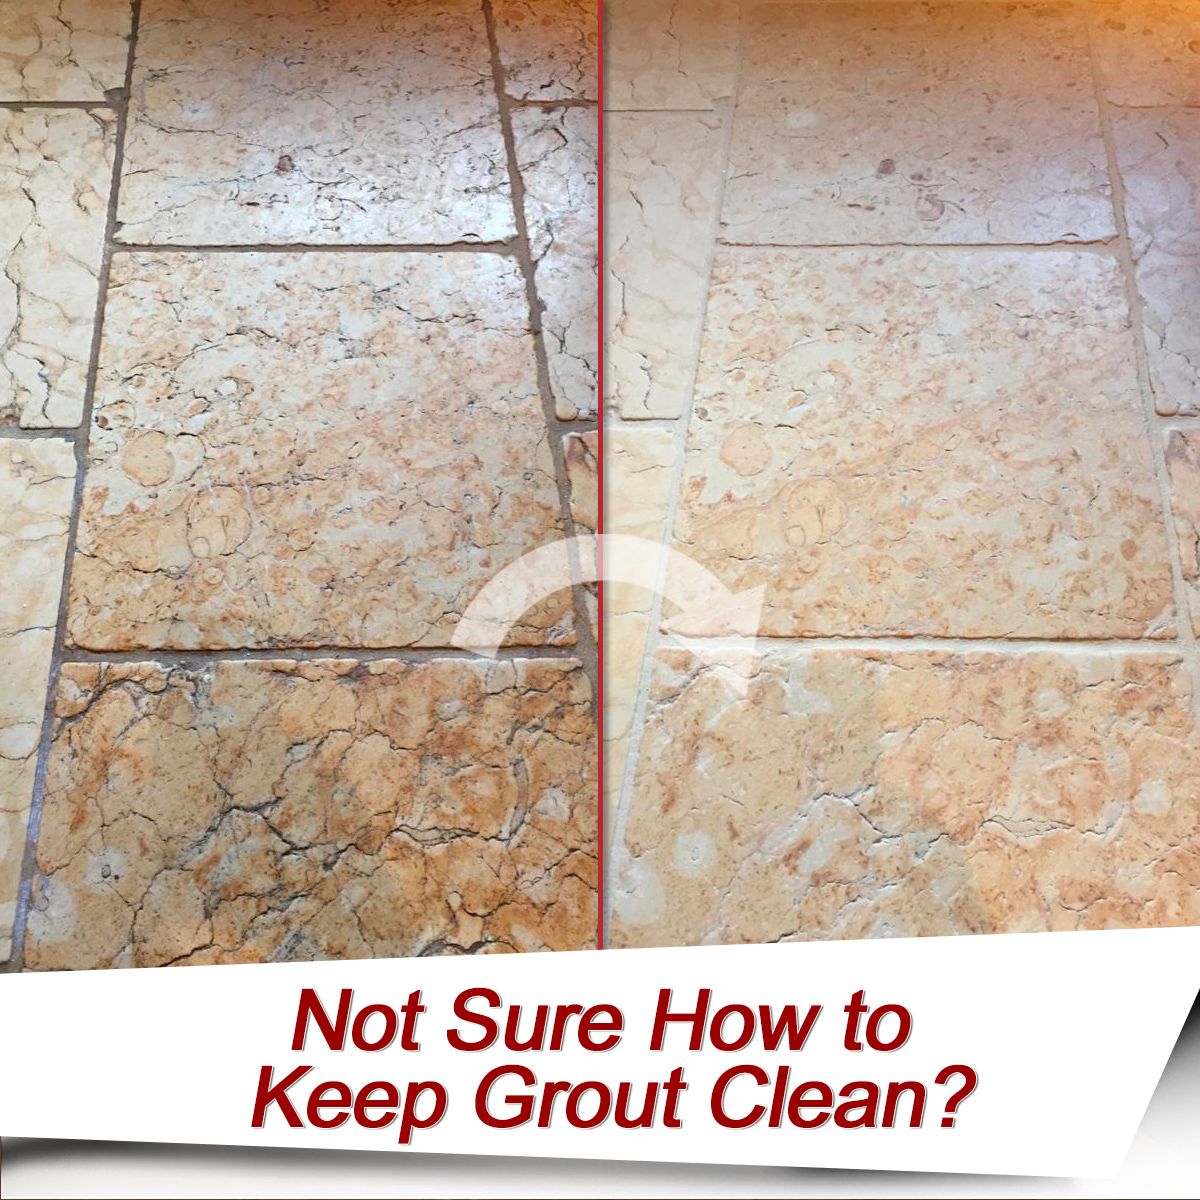 Not Sure How to Keep Grout Clean?